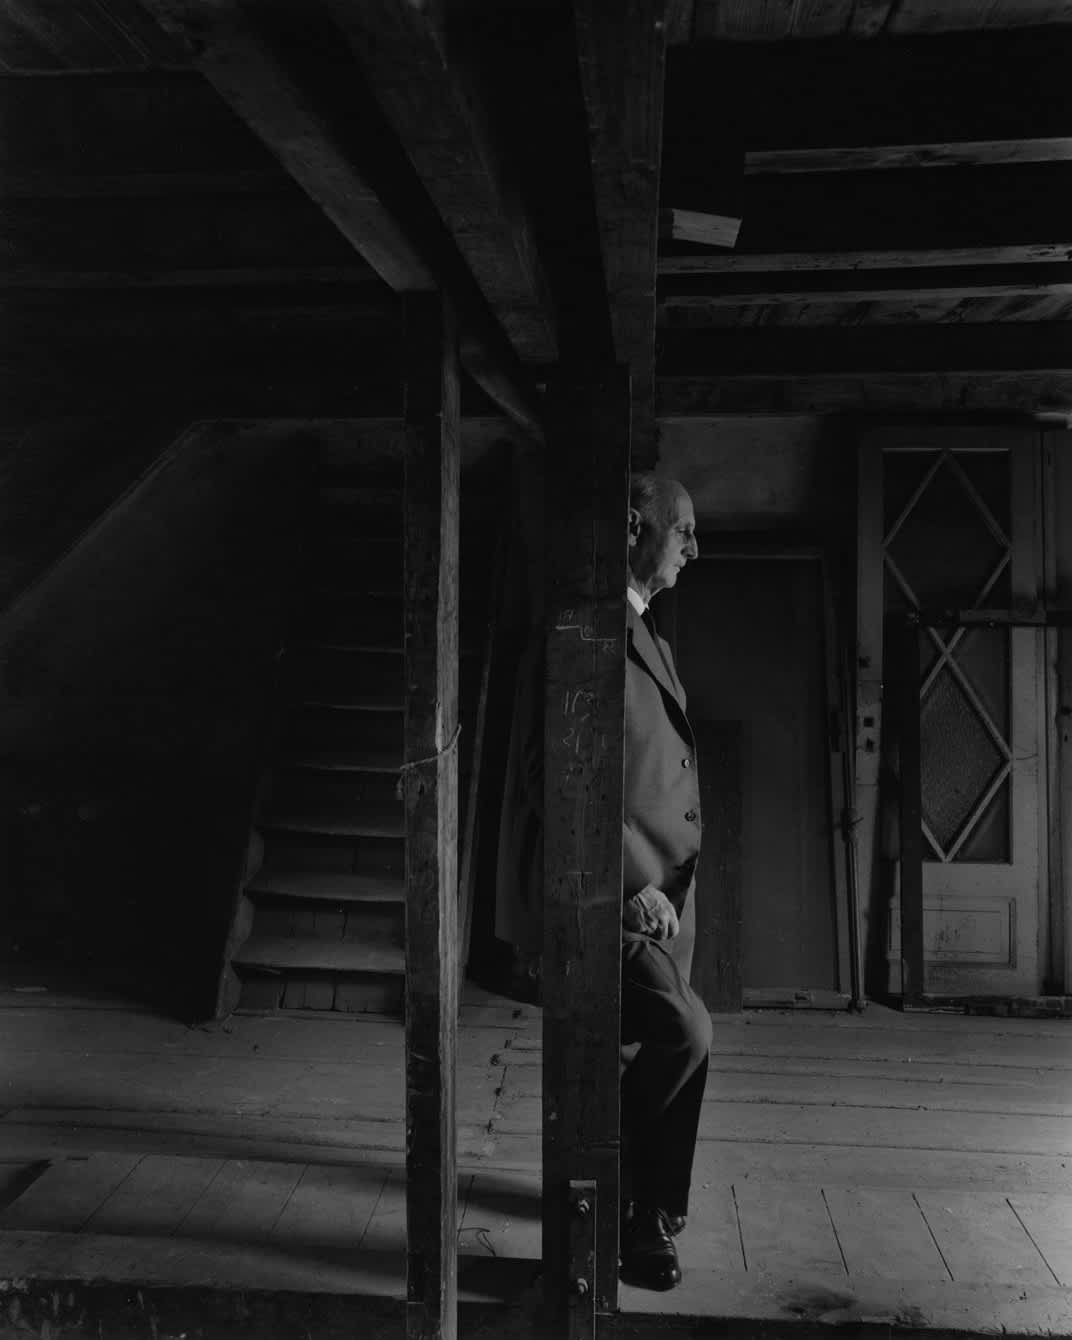 Otto Frank, The Anne Frank House, Amsterdam, 1960